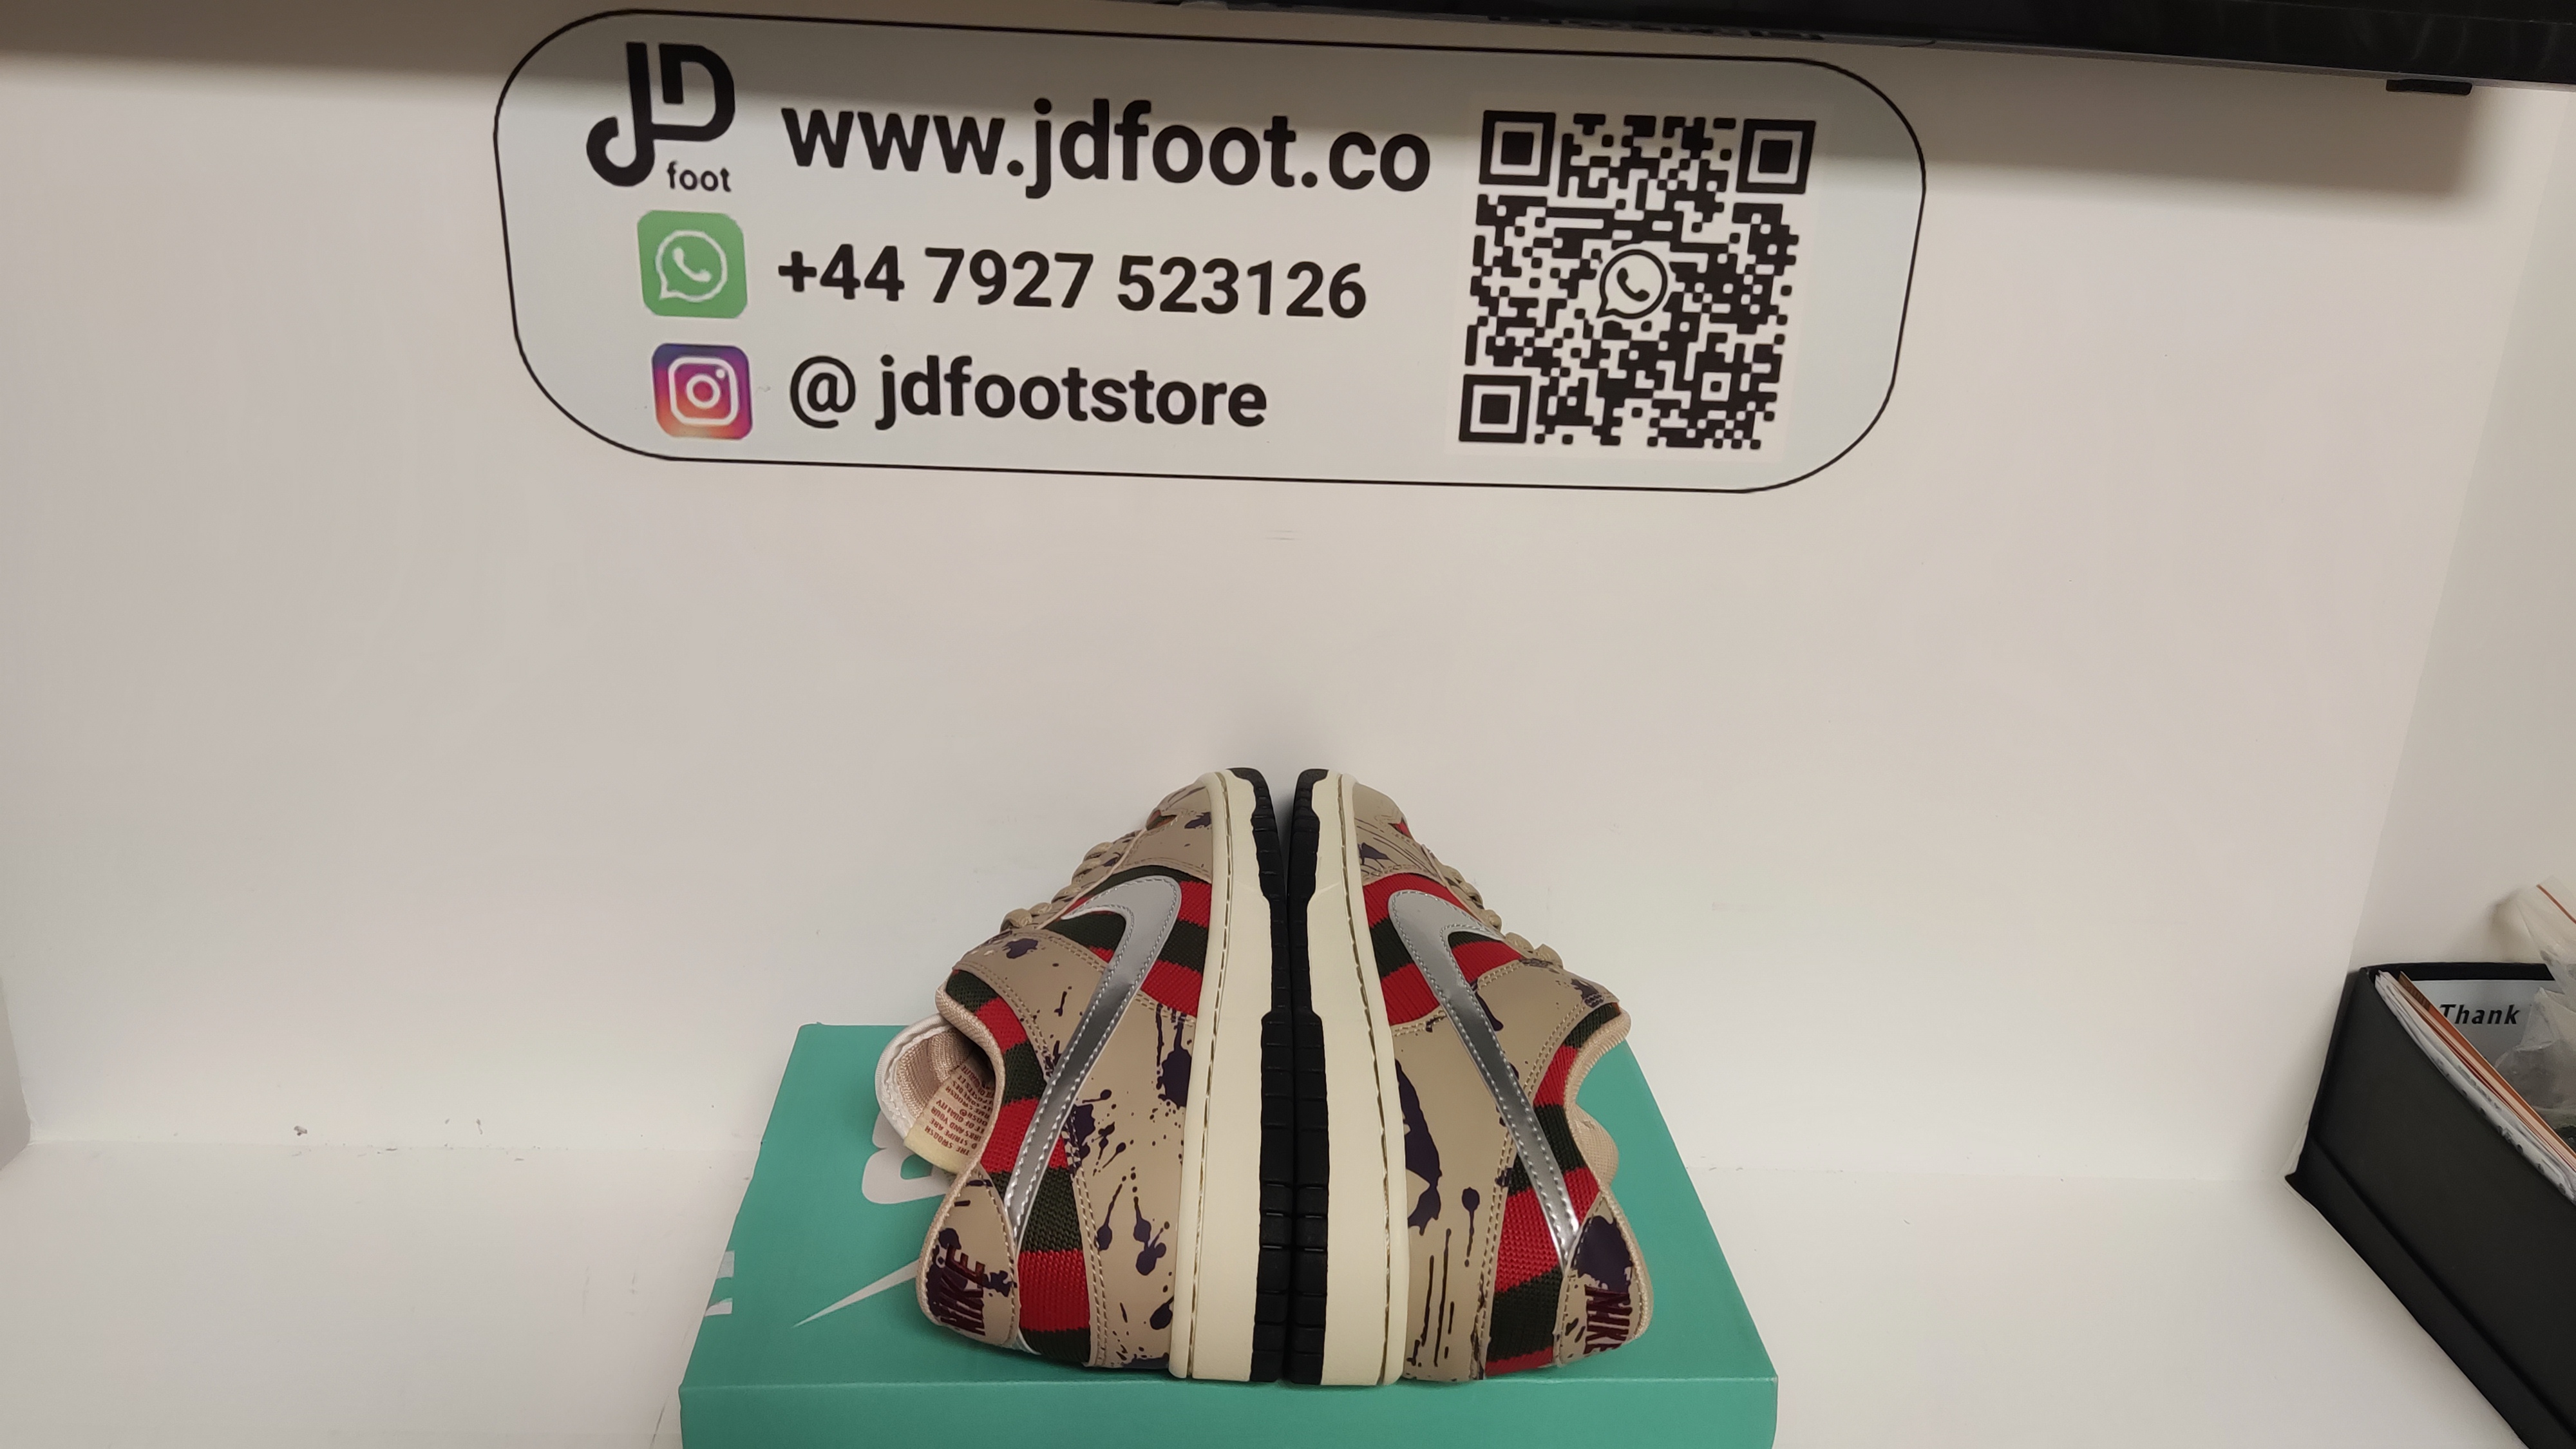 QC Picture Replica Nike Dunks Pro SB Freddy Krueger From Jdfoot